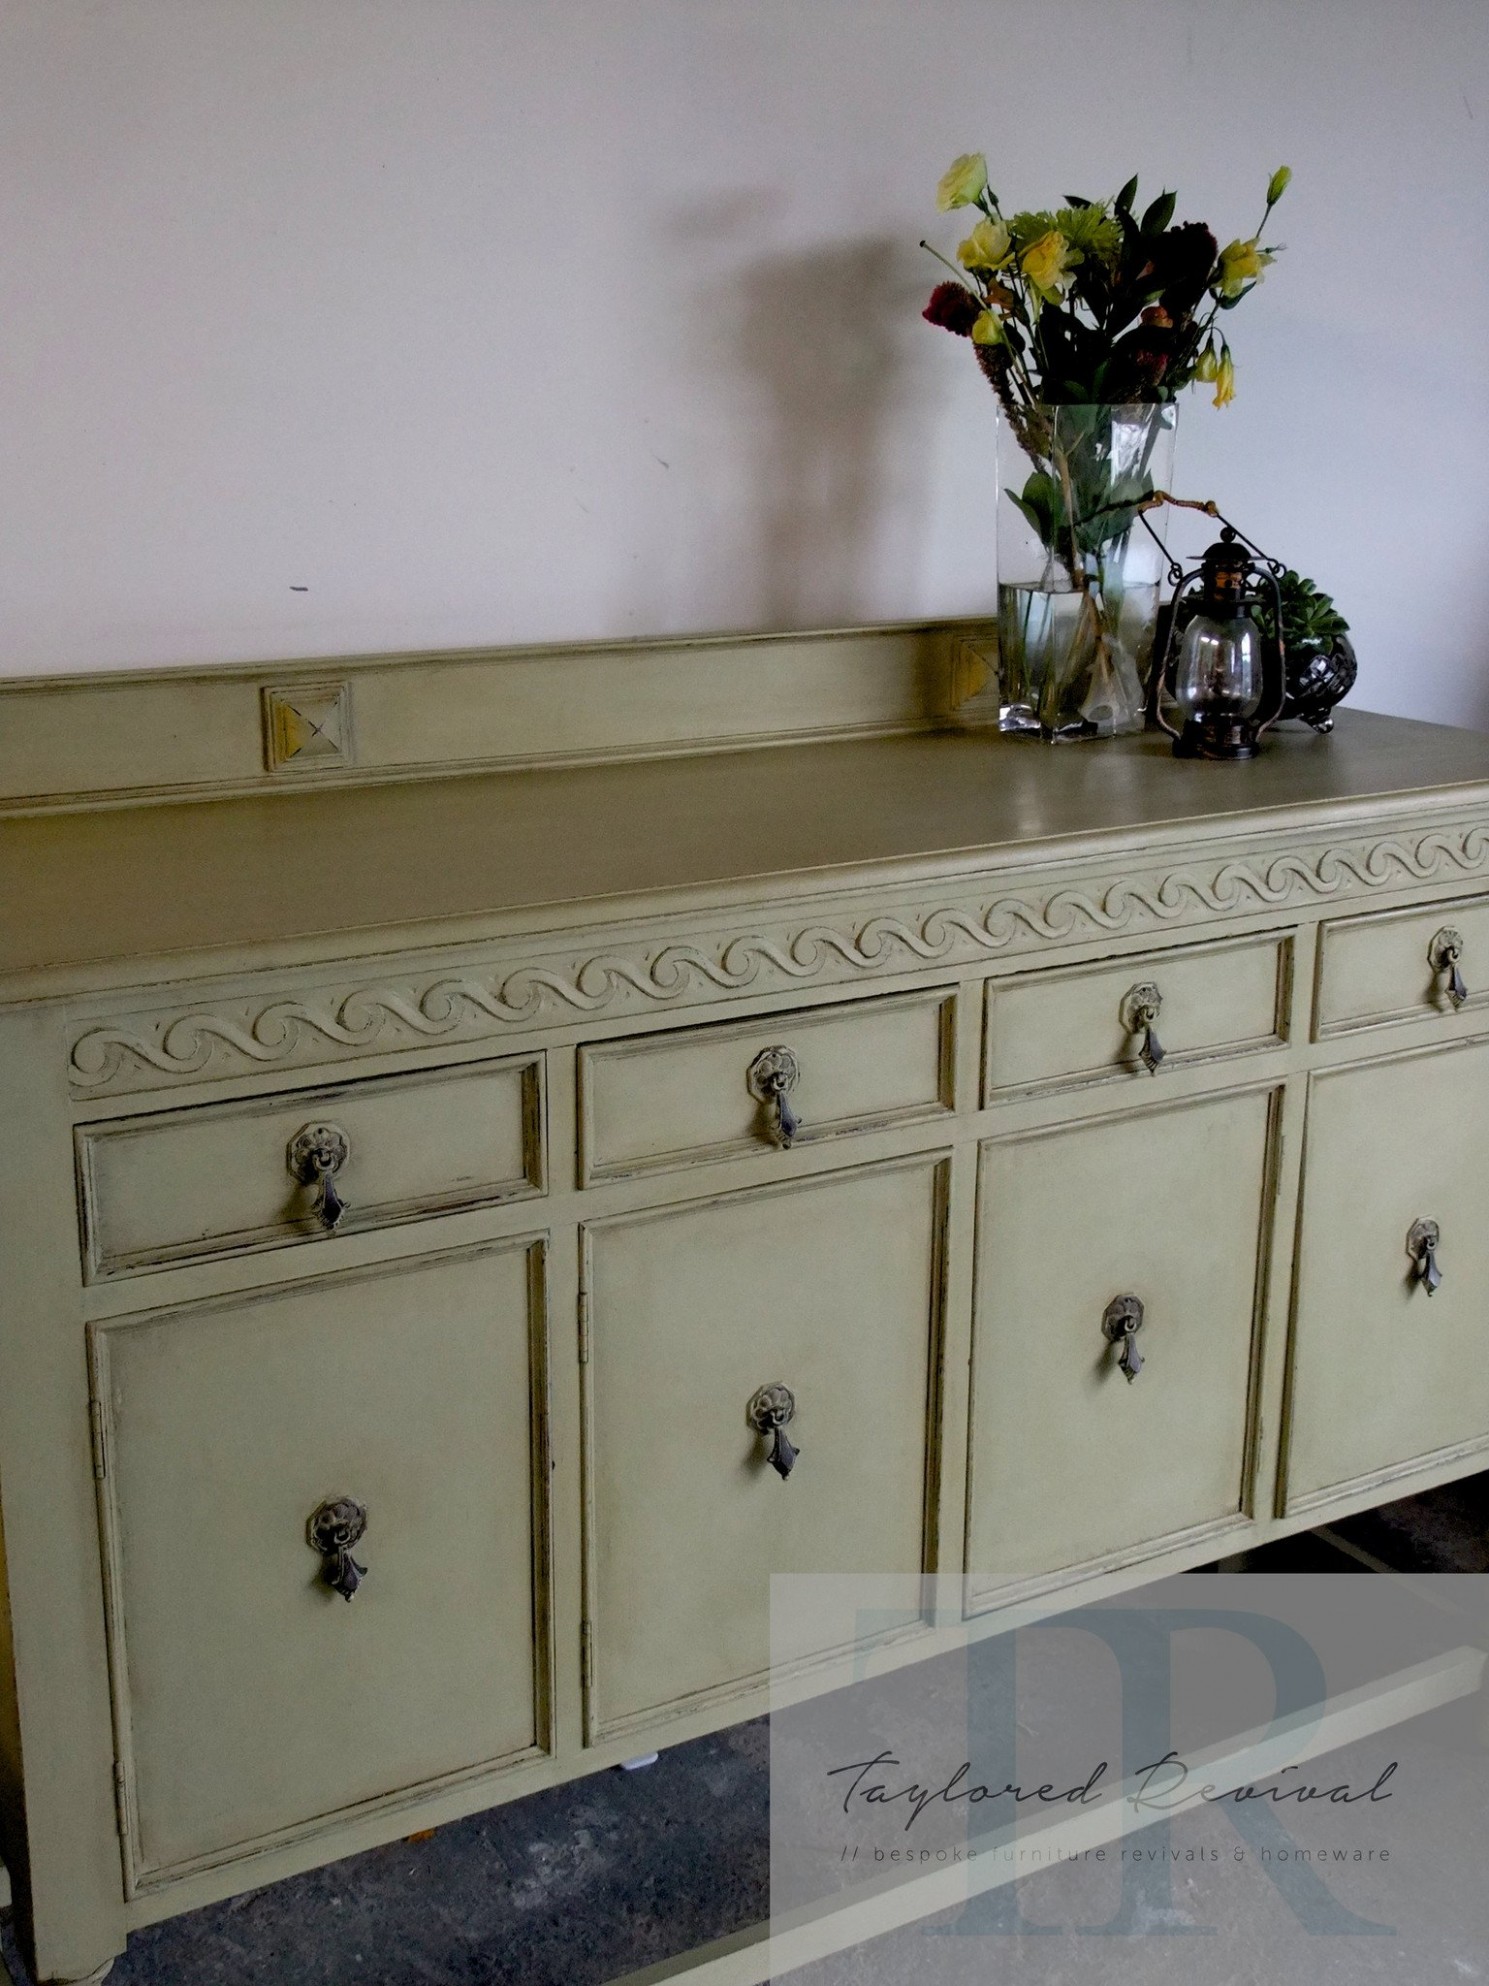 Commissioned Sideboard In Versailles Chalk Paint™ – Taylored Revival Where To Buy Chalk Paint Auckland